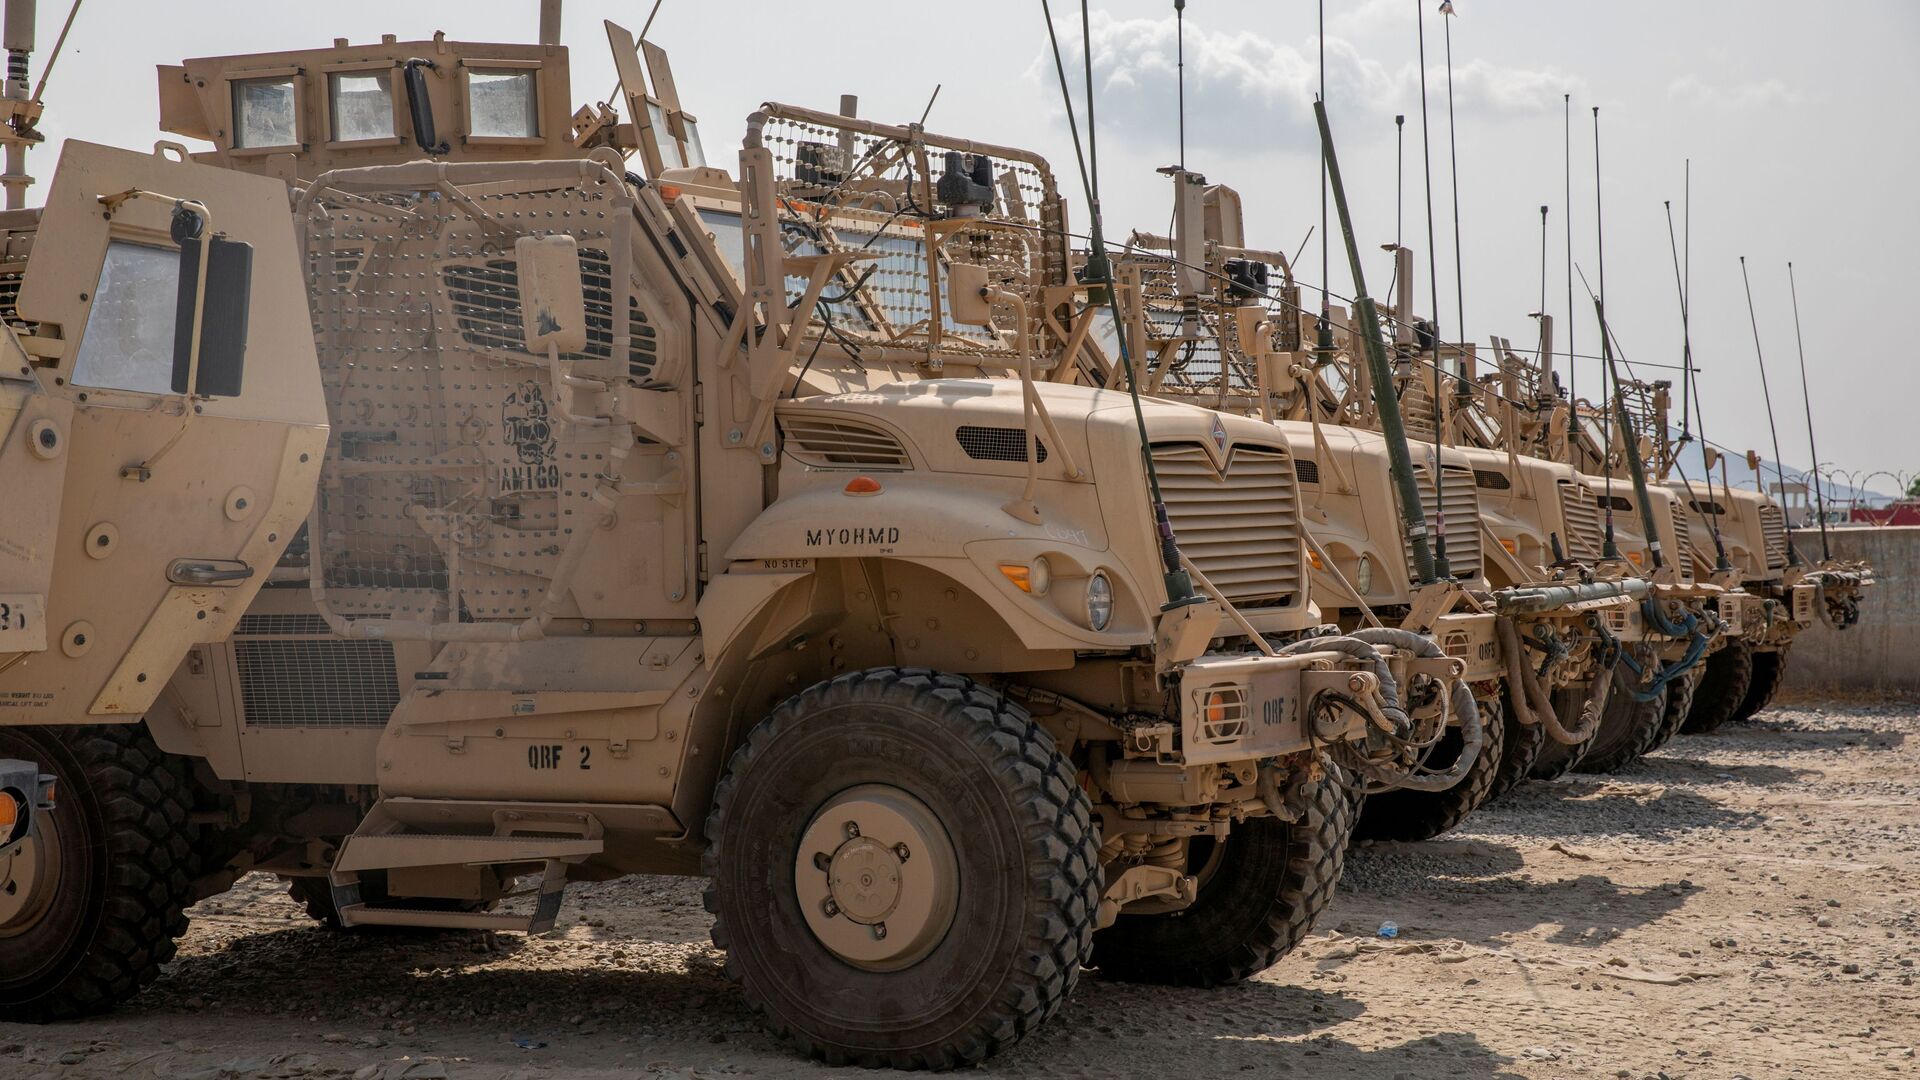 U.S. Army soldiers from the 10th Mountain Division and U.S. contractors prepare Mine Resistant Ambush Protected vehicles, MRAPs, to be transported off of base in support of the withdrawal mission in Kandahar, Afghanistan, August 21, 2020. Picture taken August 21, 2020. U.S. Army/Sgt. Jeffery J. Harris - Sputnik International, 1920, 31.08.2021